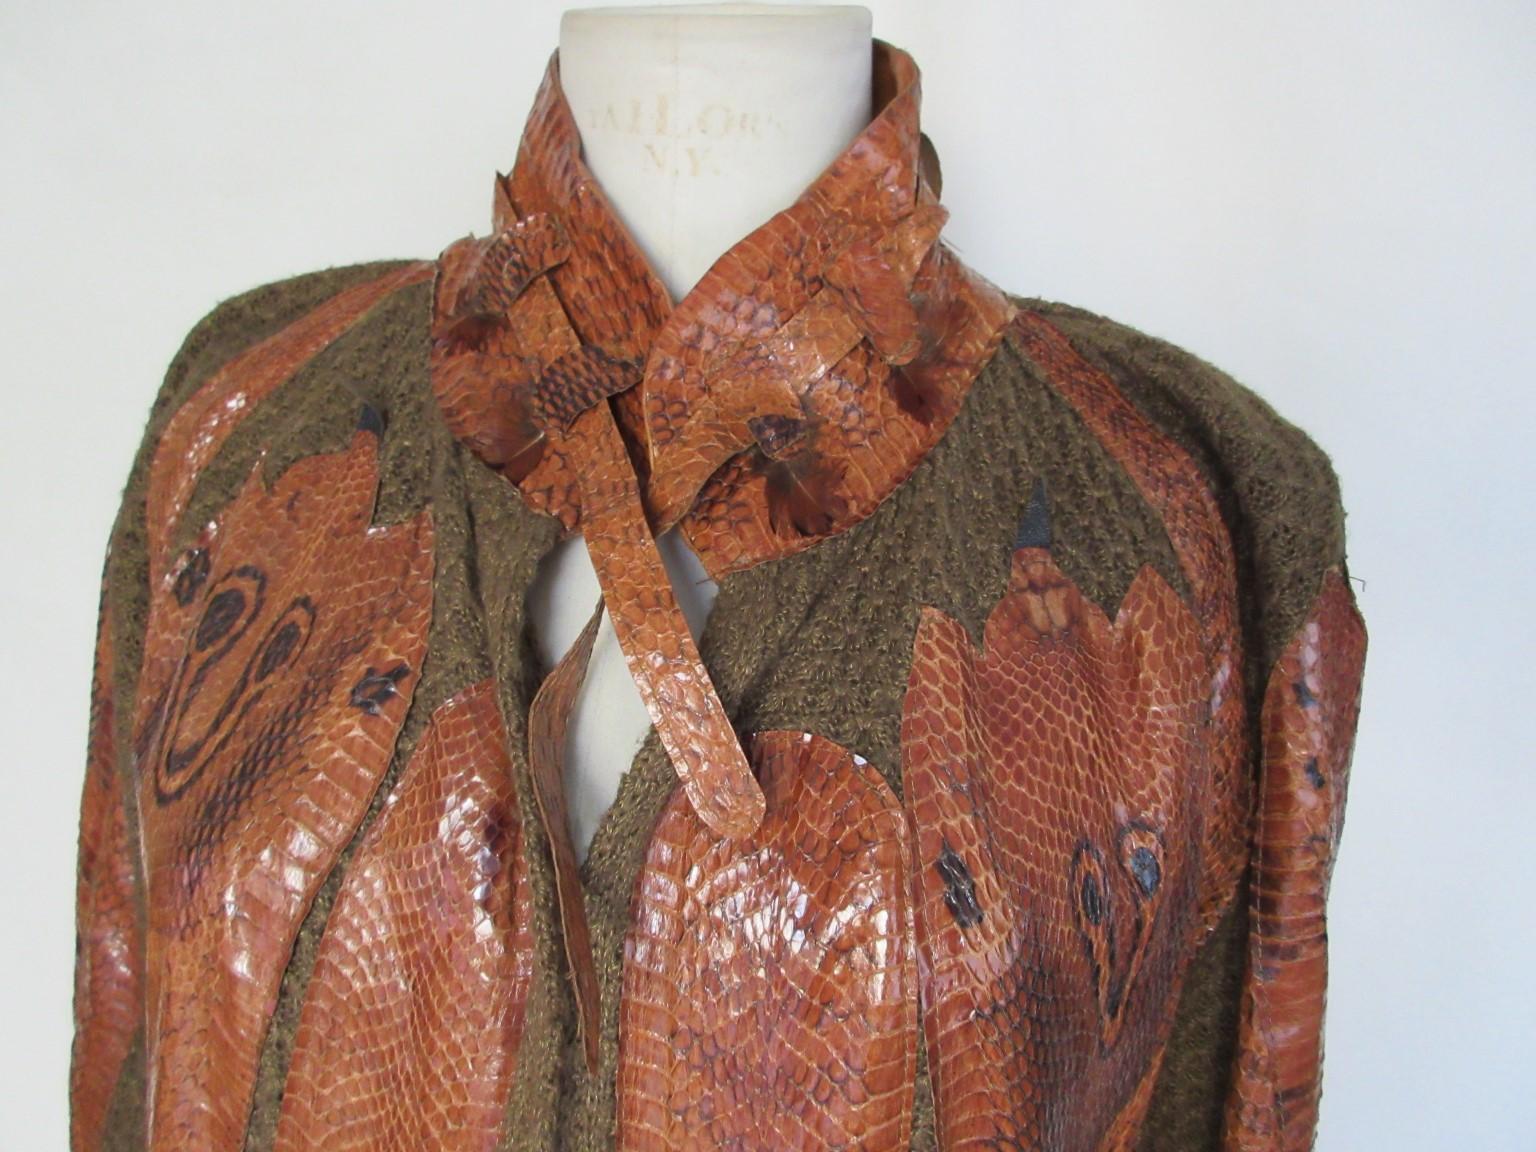 Fabulous original 70s/80s knit coat with  cognac color snakeskin appliqués made in Ibiza, designer Ginger.

We offer more exclusive vintage items, view our frontstore

Details:
Knitted (wool blend) with supple snakeskin appliqués throughout.
No